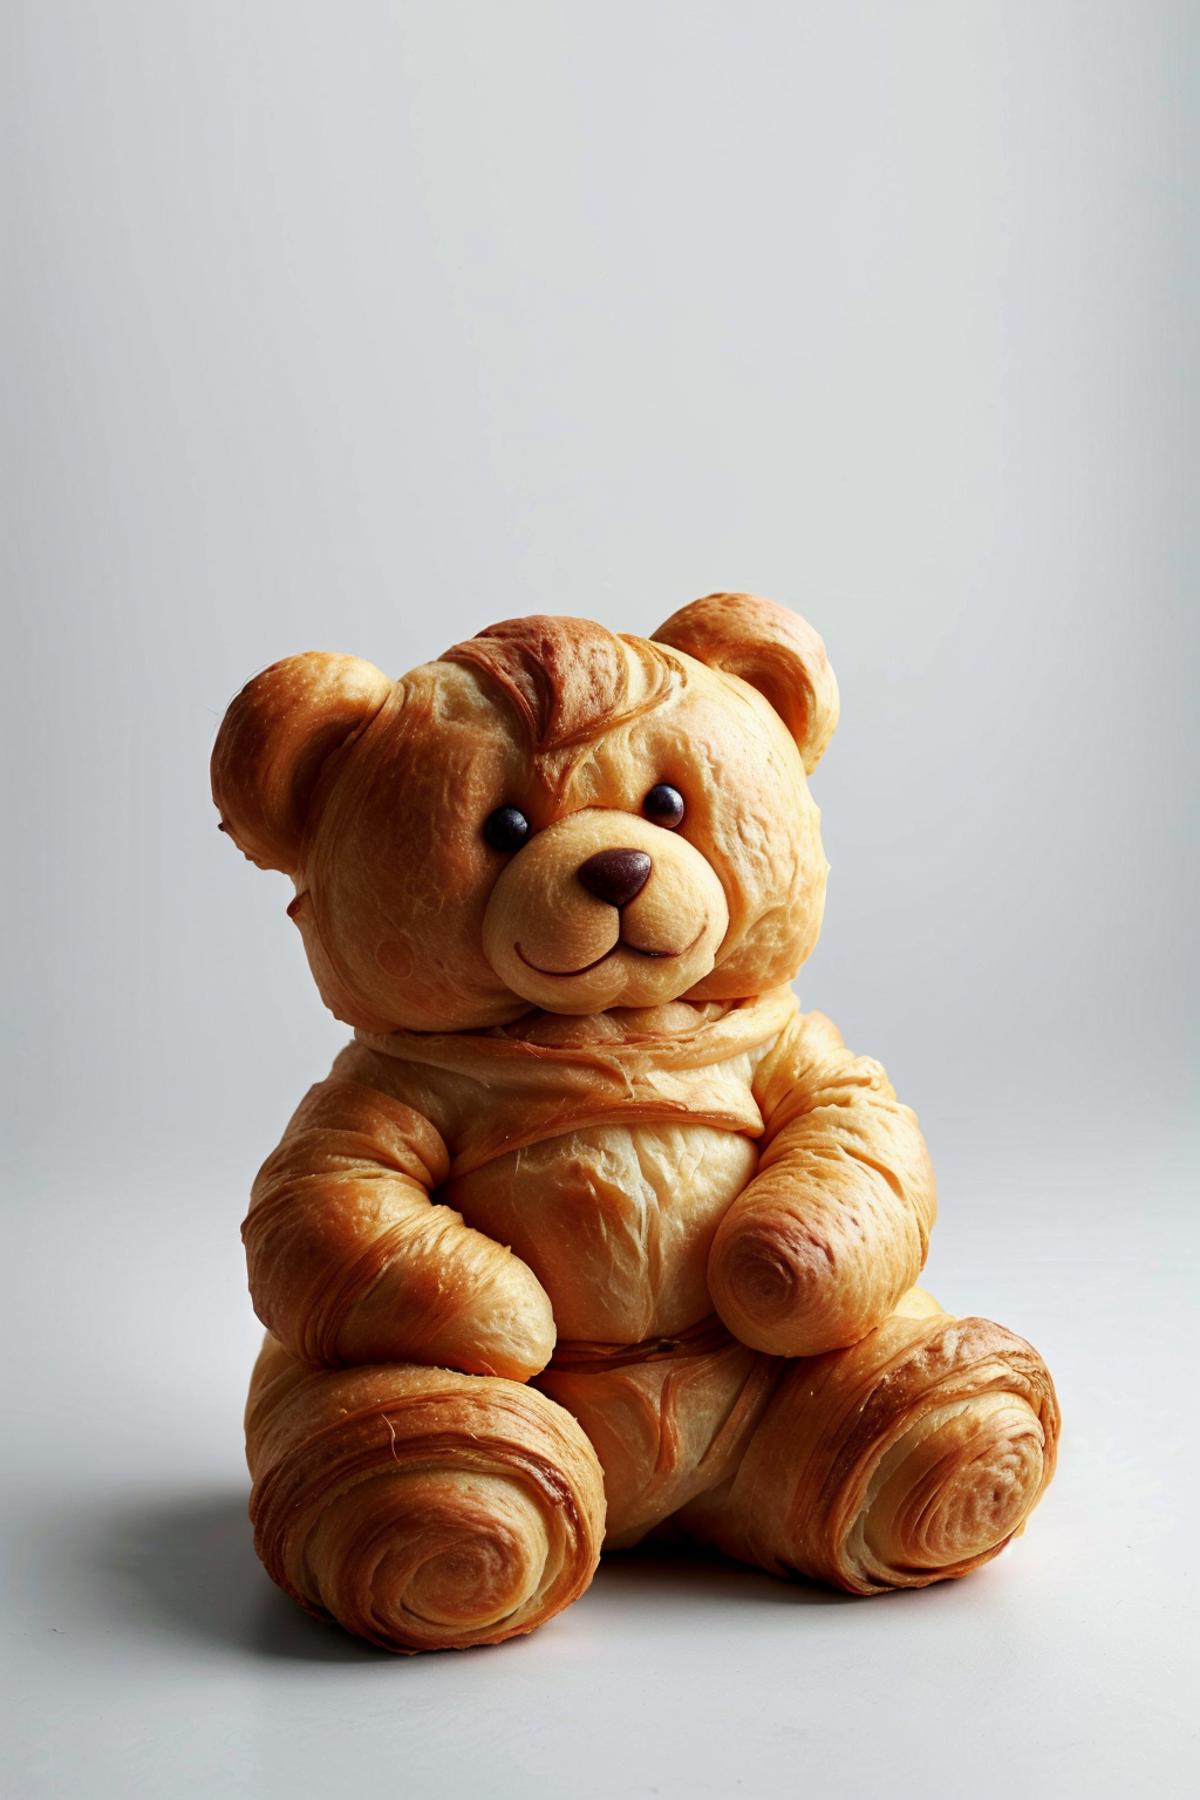 A large pastry teddy bear sitting on a white surface.